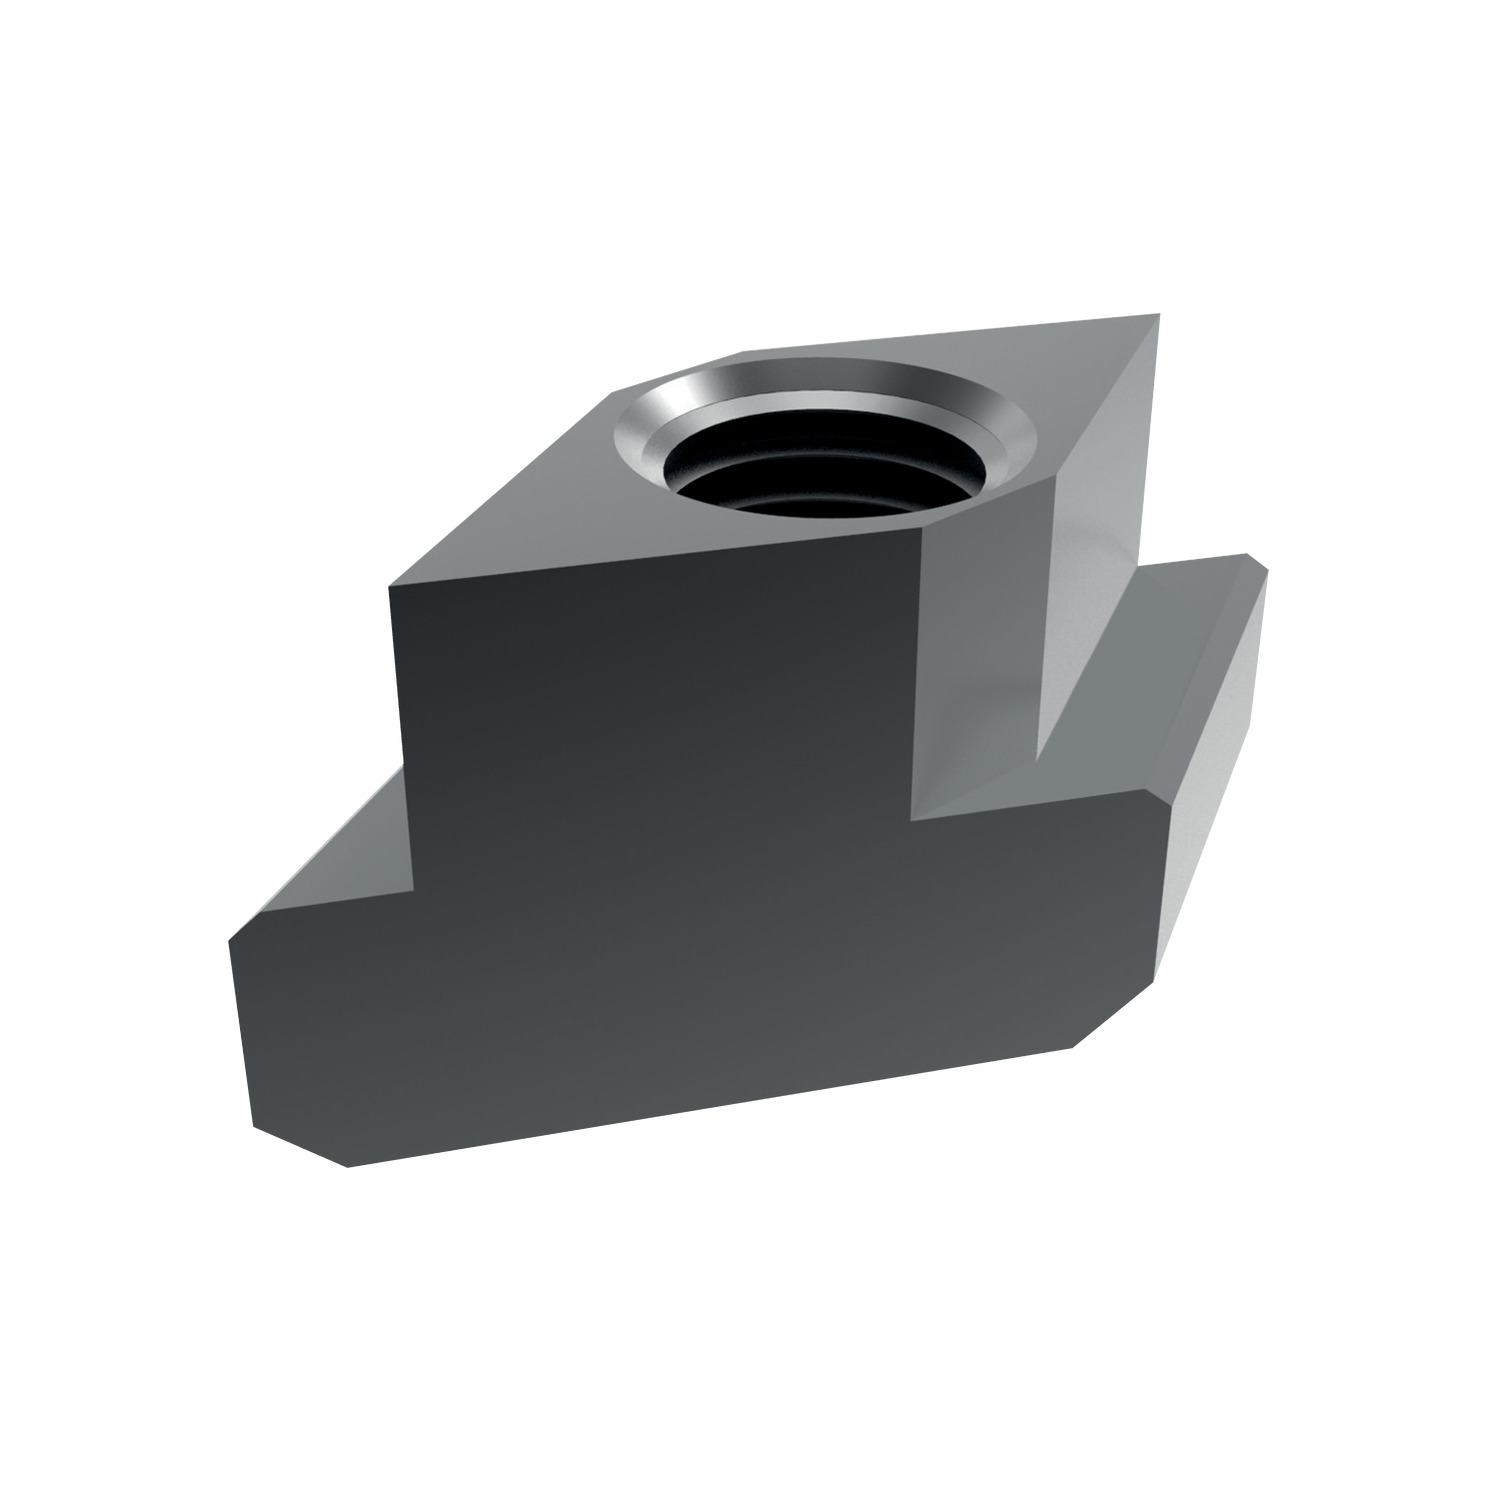 Rhombus T-Nuts Rhombus T-Nuts, steel, heat-treated. Very useful on long T-slots or where workpiece layout prohibits the introduction of bolts or nuts from the end of the T-slot. Keep slots clean to ensure accurate fit.